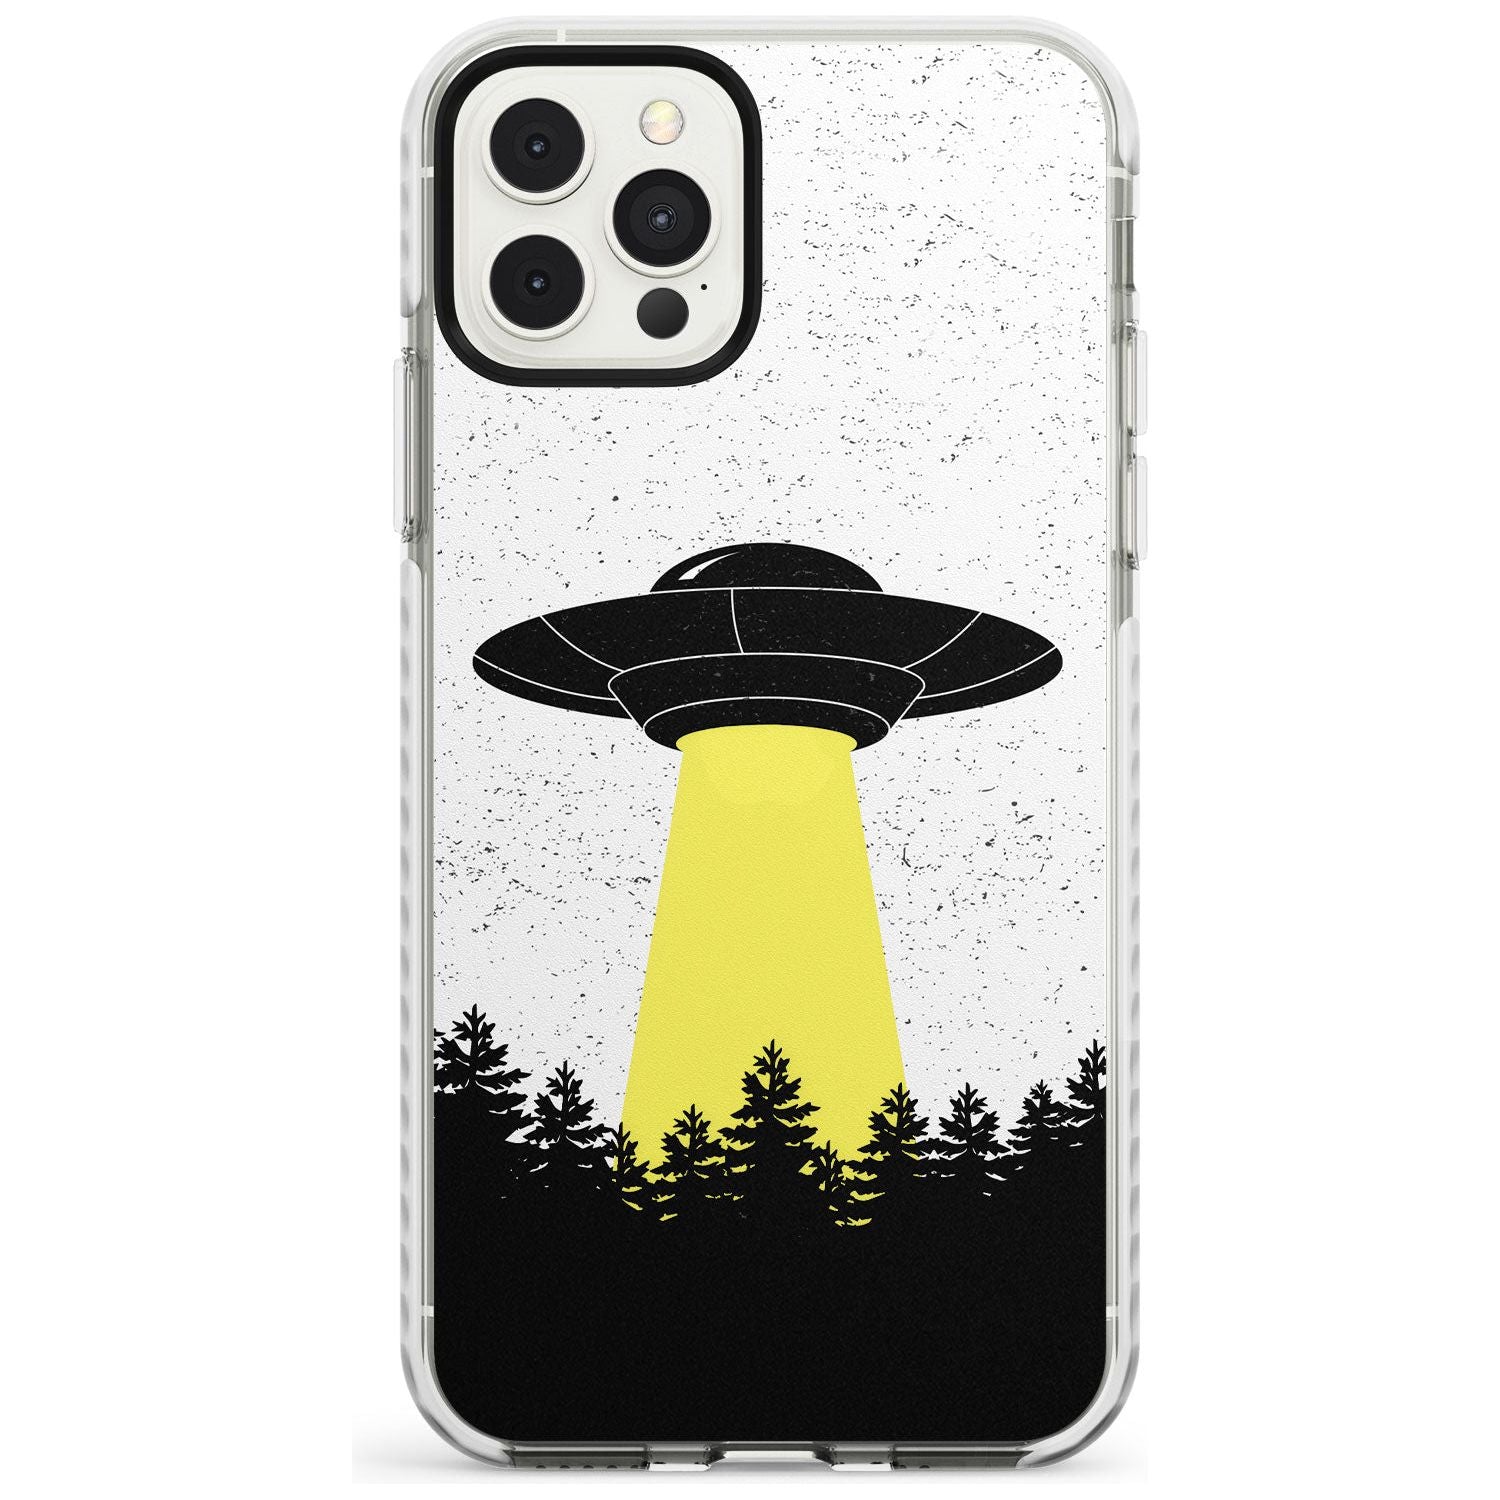 Forest Abduction Impact Phone Case for iPhone 11 Pro Max